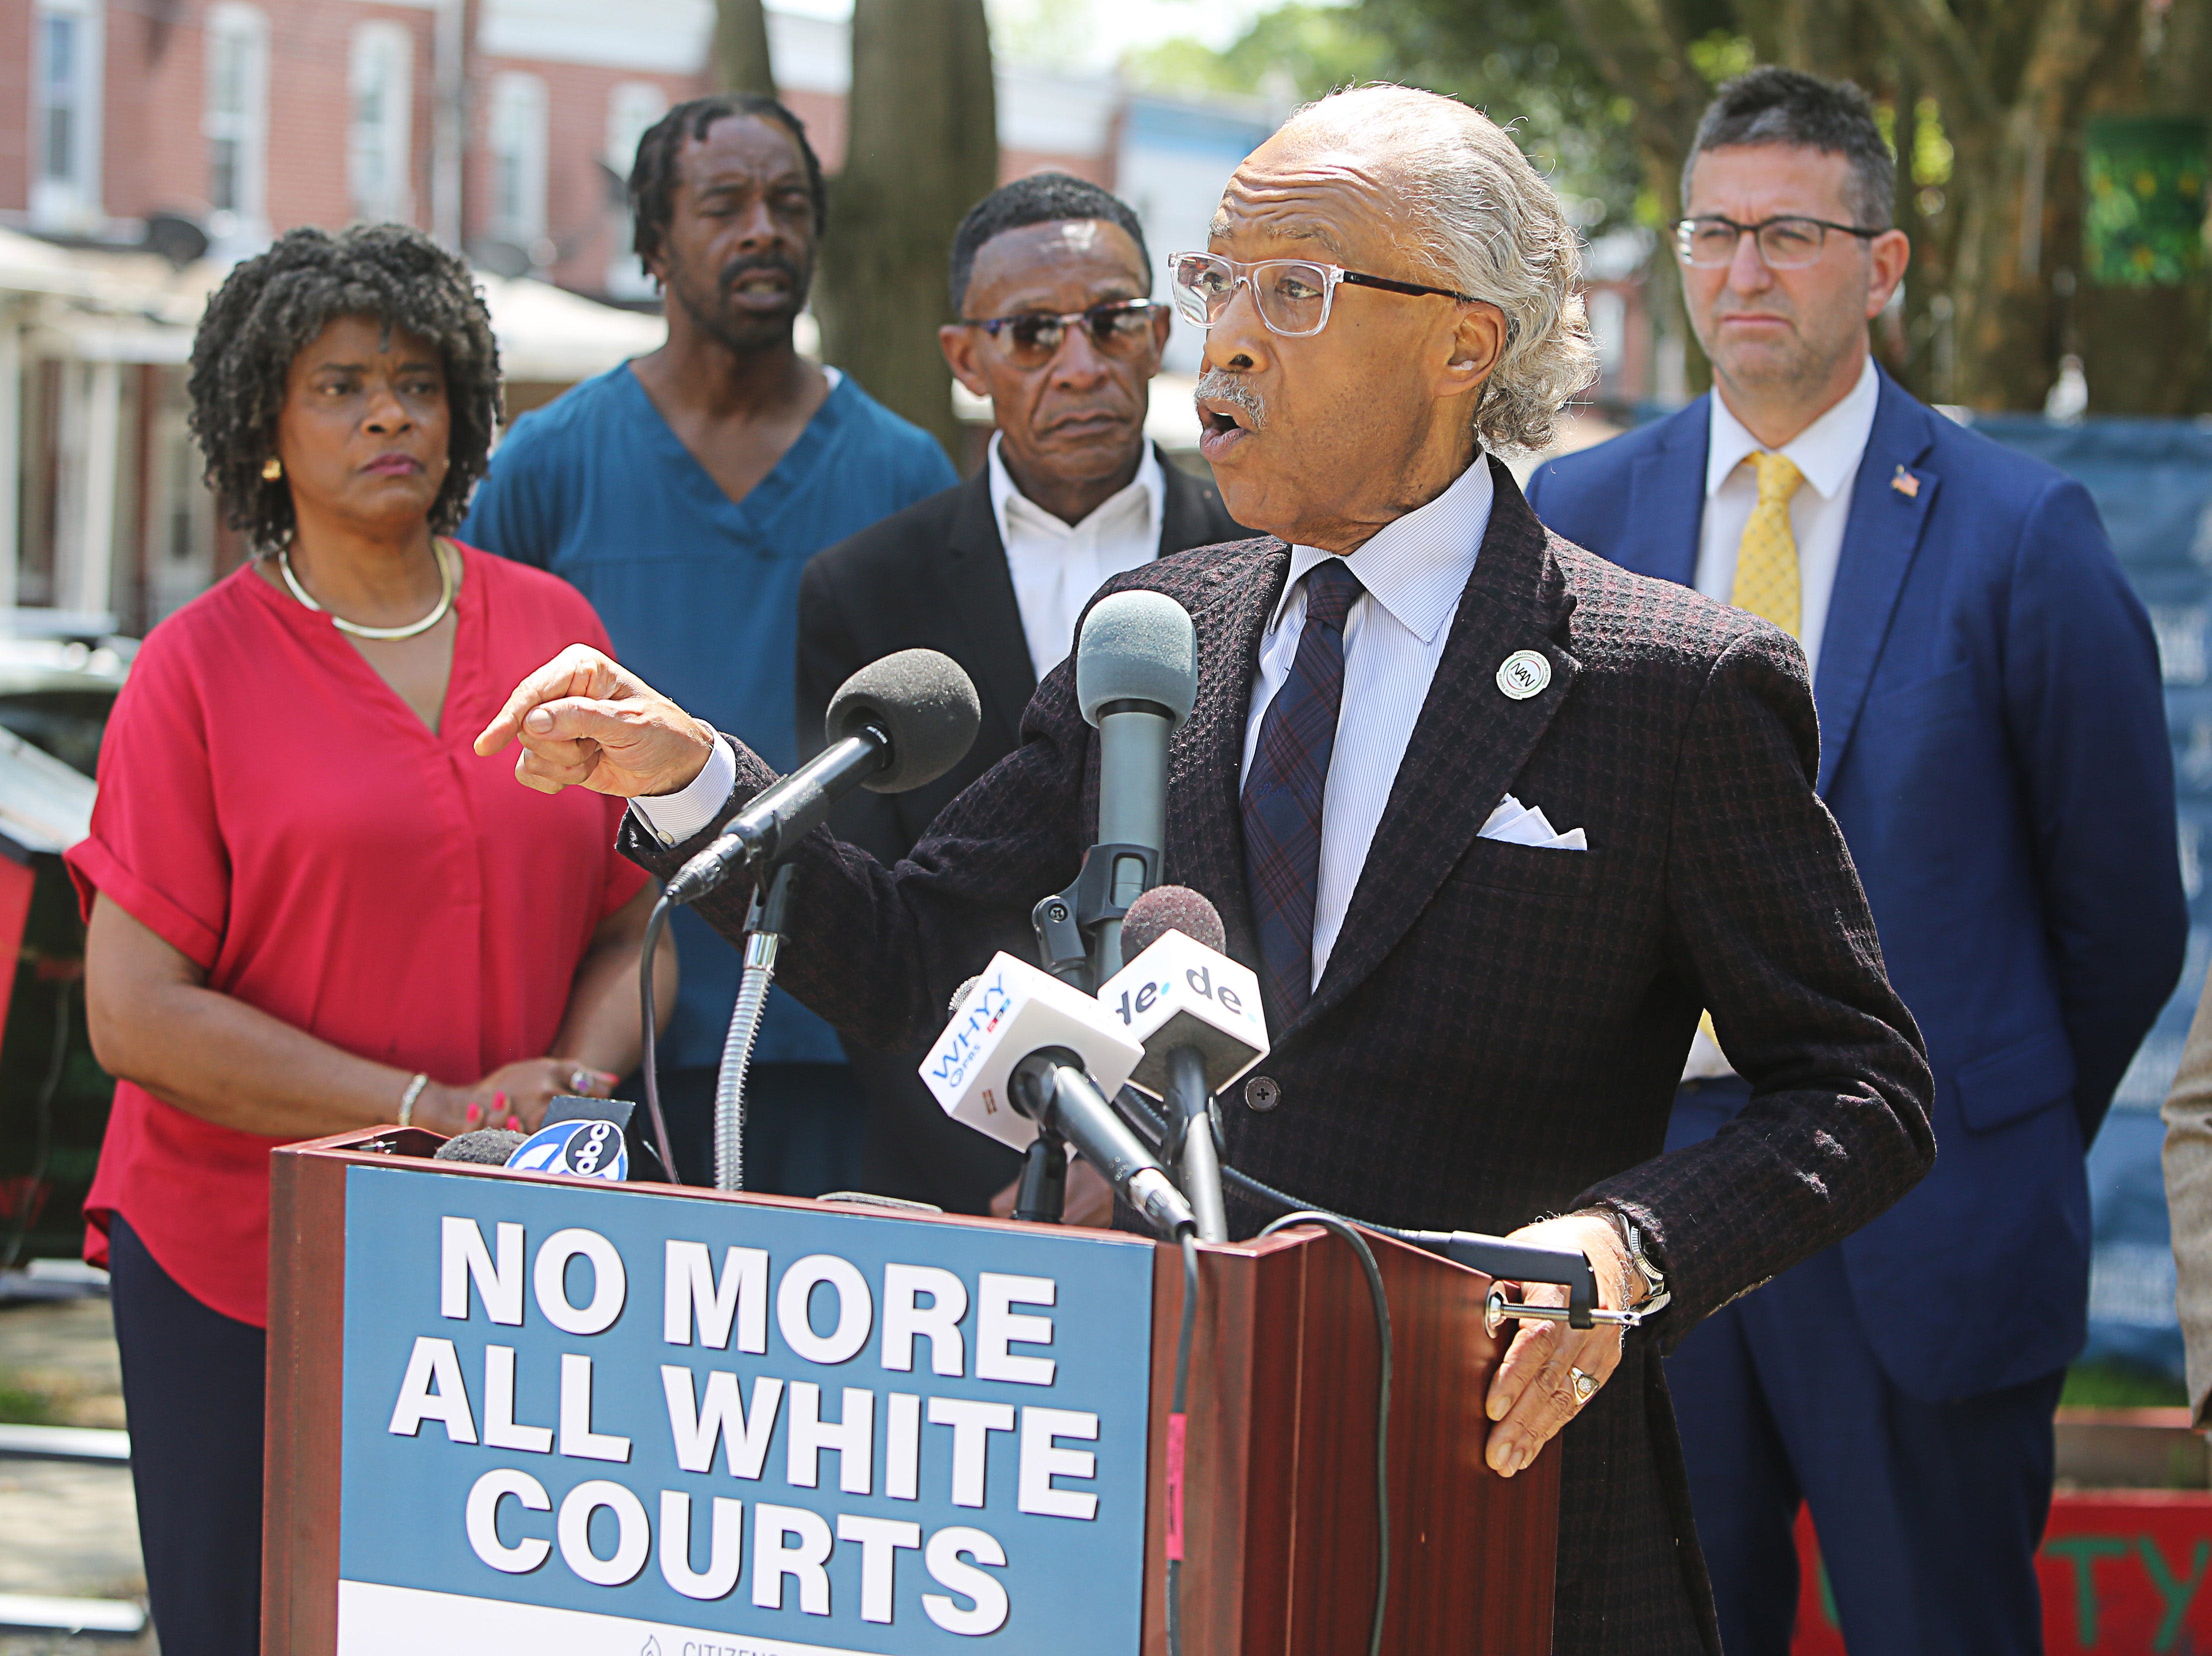 Rev. Al Sharpton returns to Delaware to rally voters, demand a more diverse court system